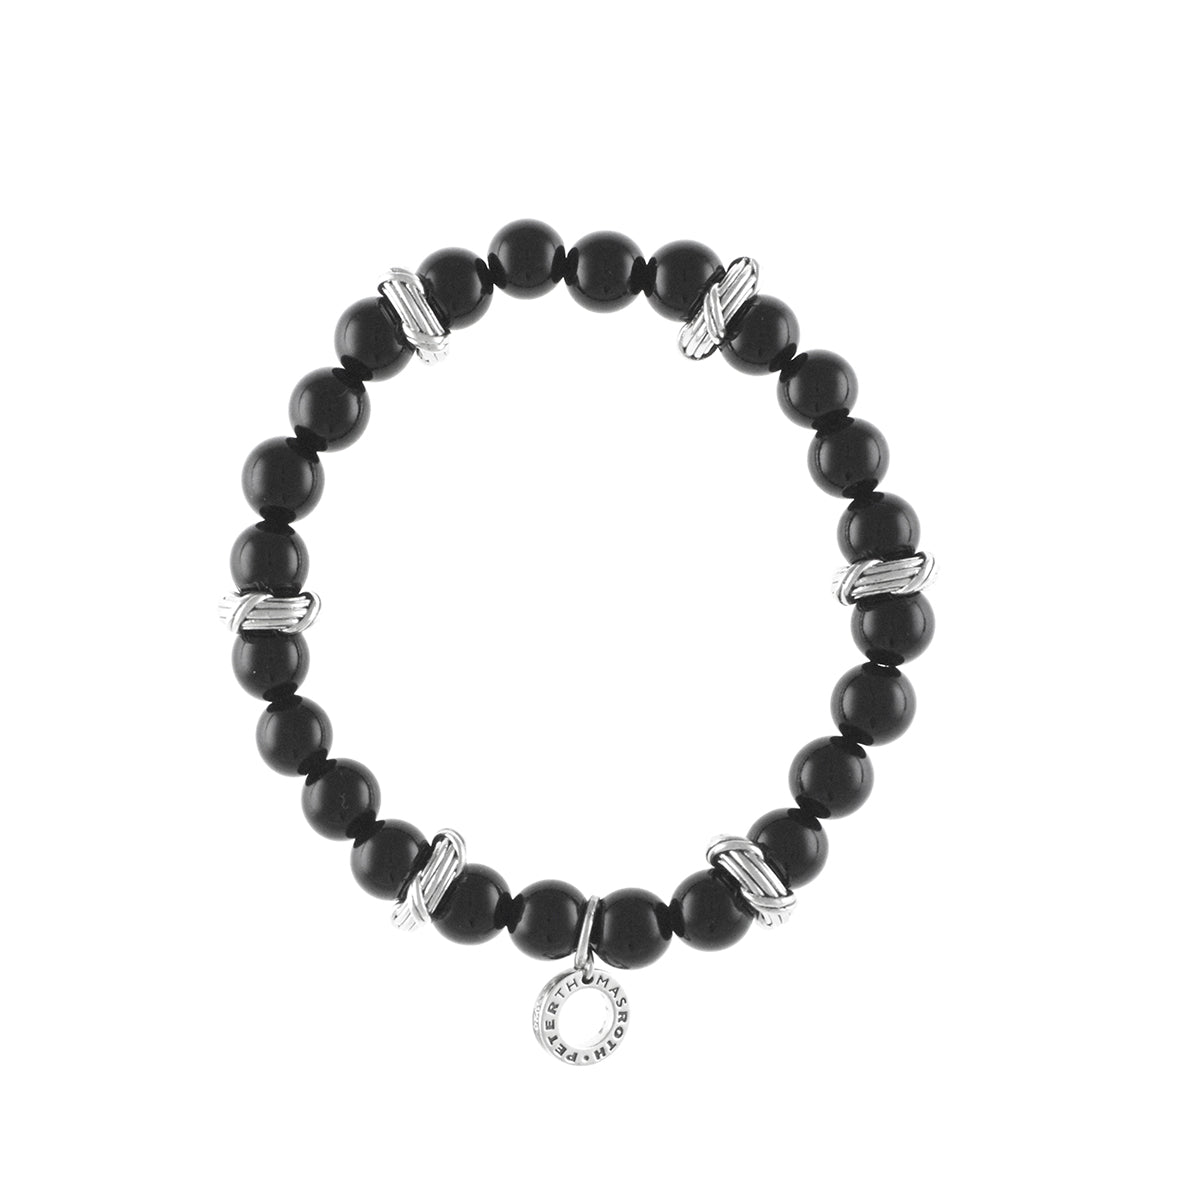 Ribbon & Reed Bead Bracelet in black onyx and sterling silver 8mm ...